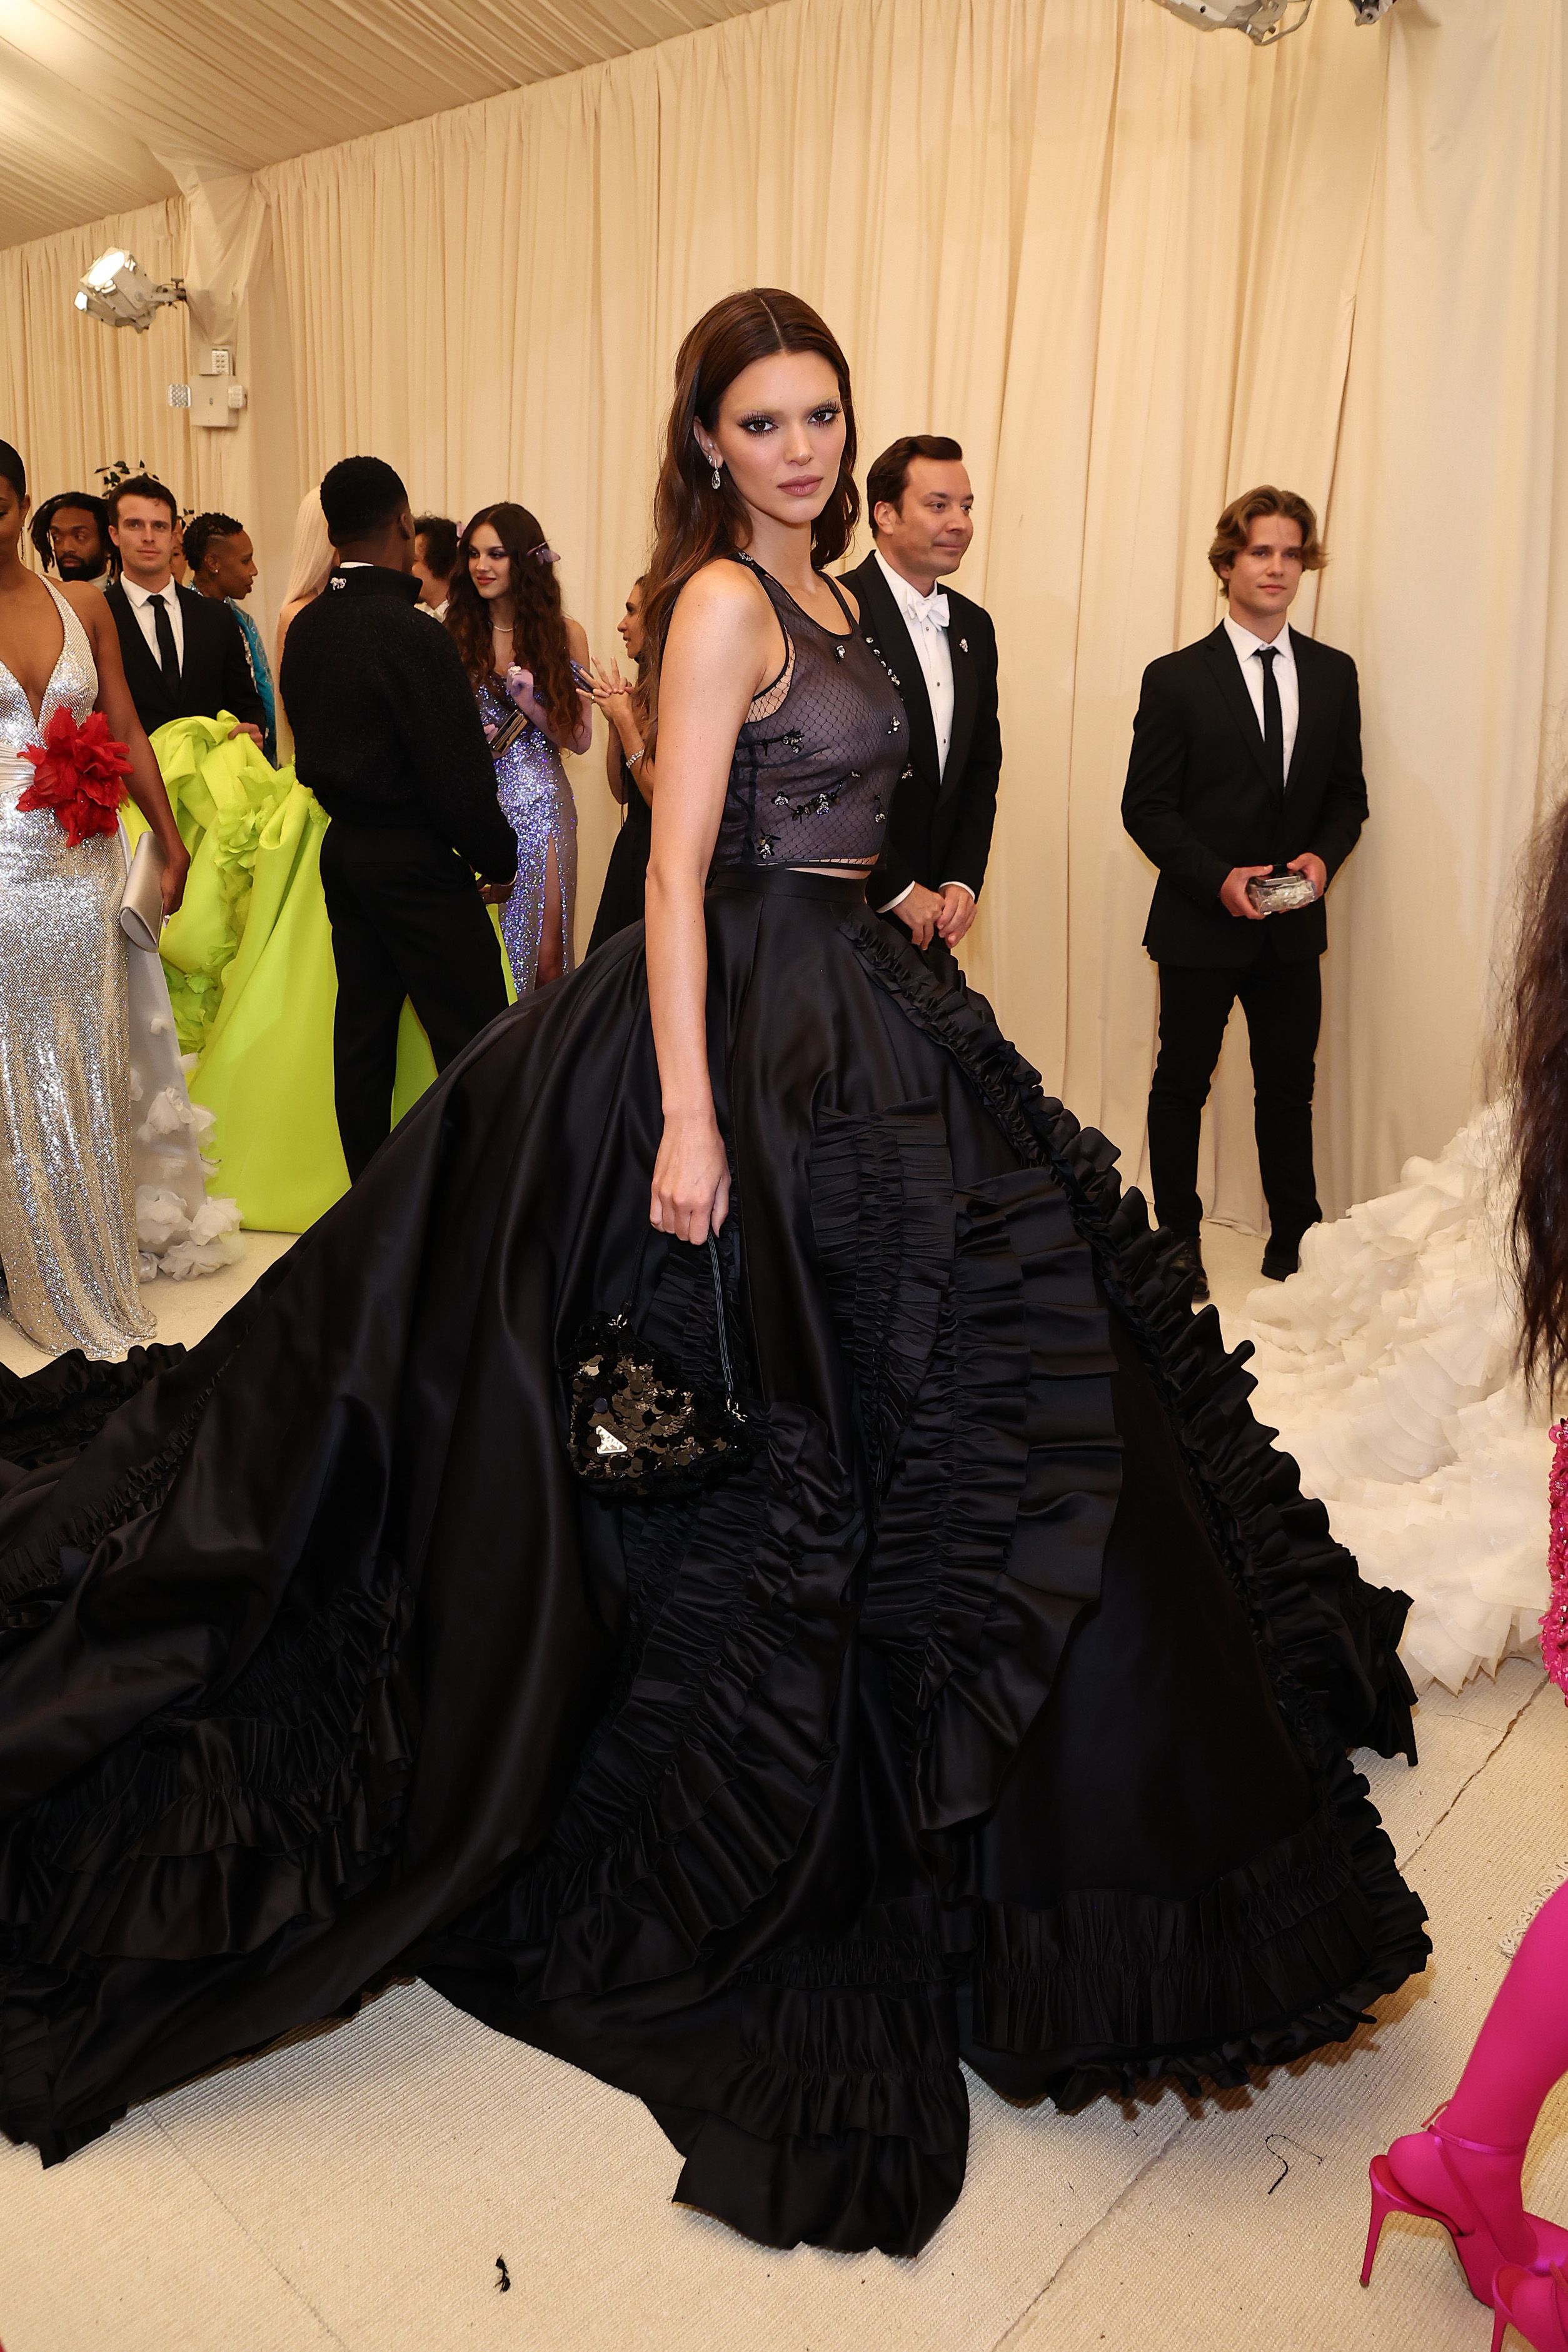 Do you have to pay to attend Met Gala?